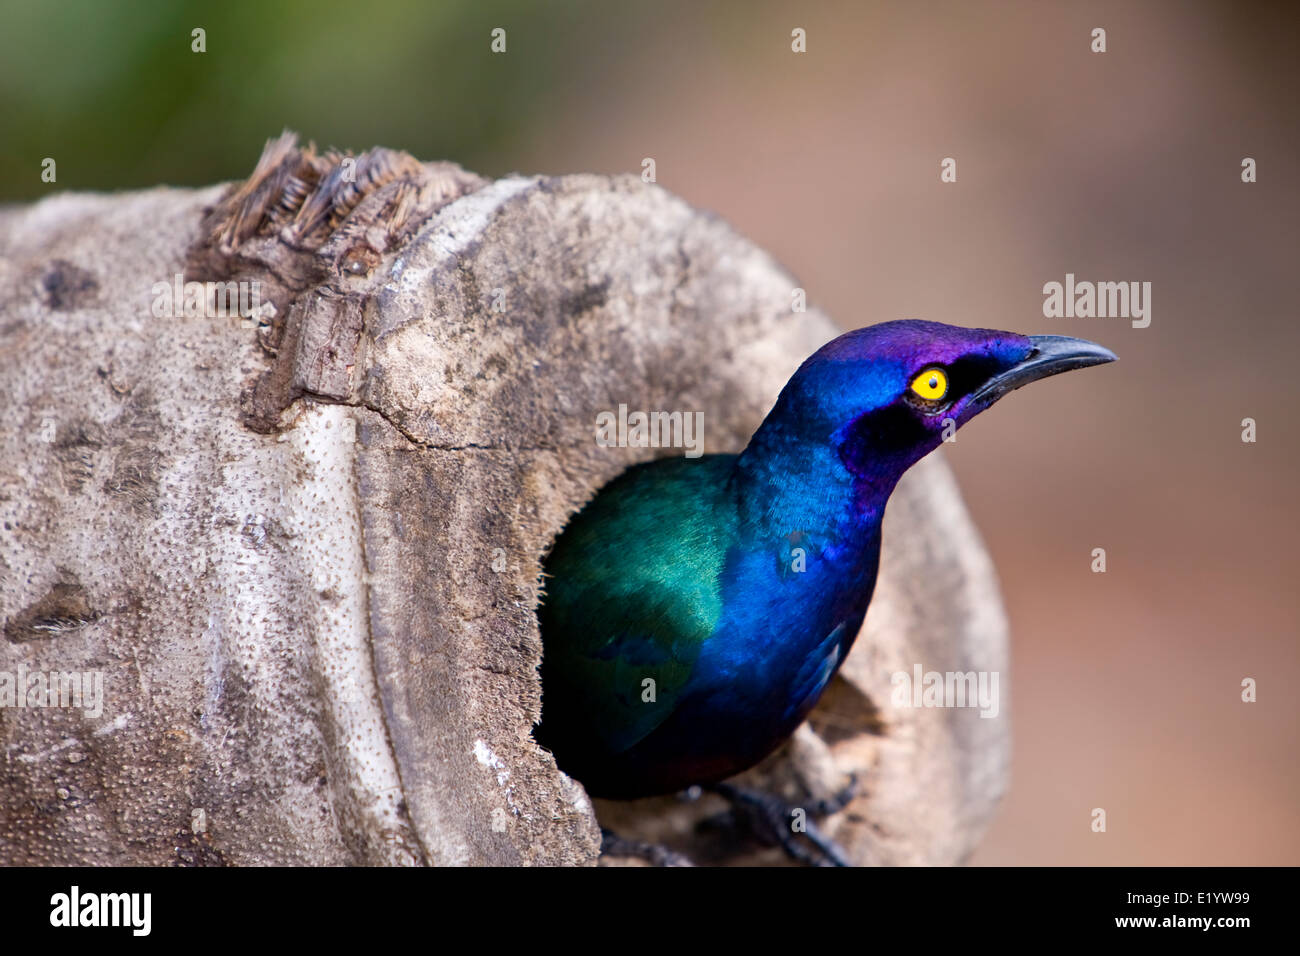 Cape starling, red-shouldered glossy-starling or Cape glossy starling ( Lamprotornis nitens ) Stock Photo